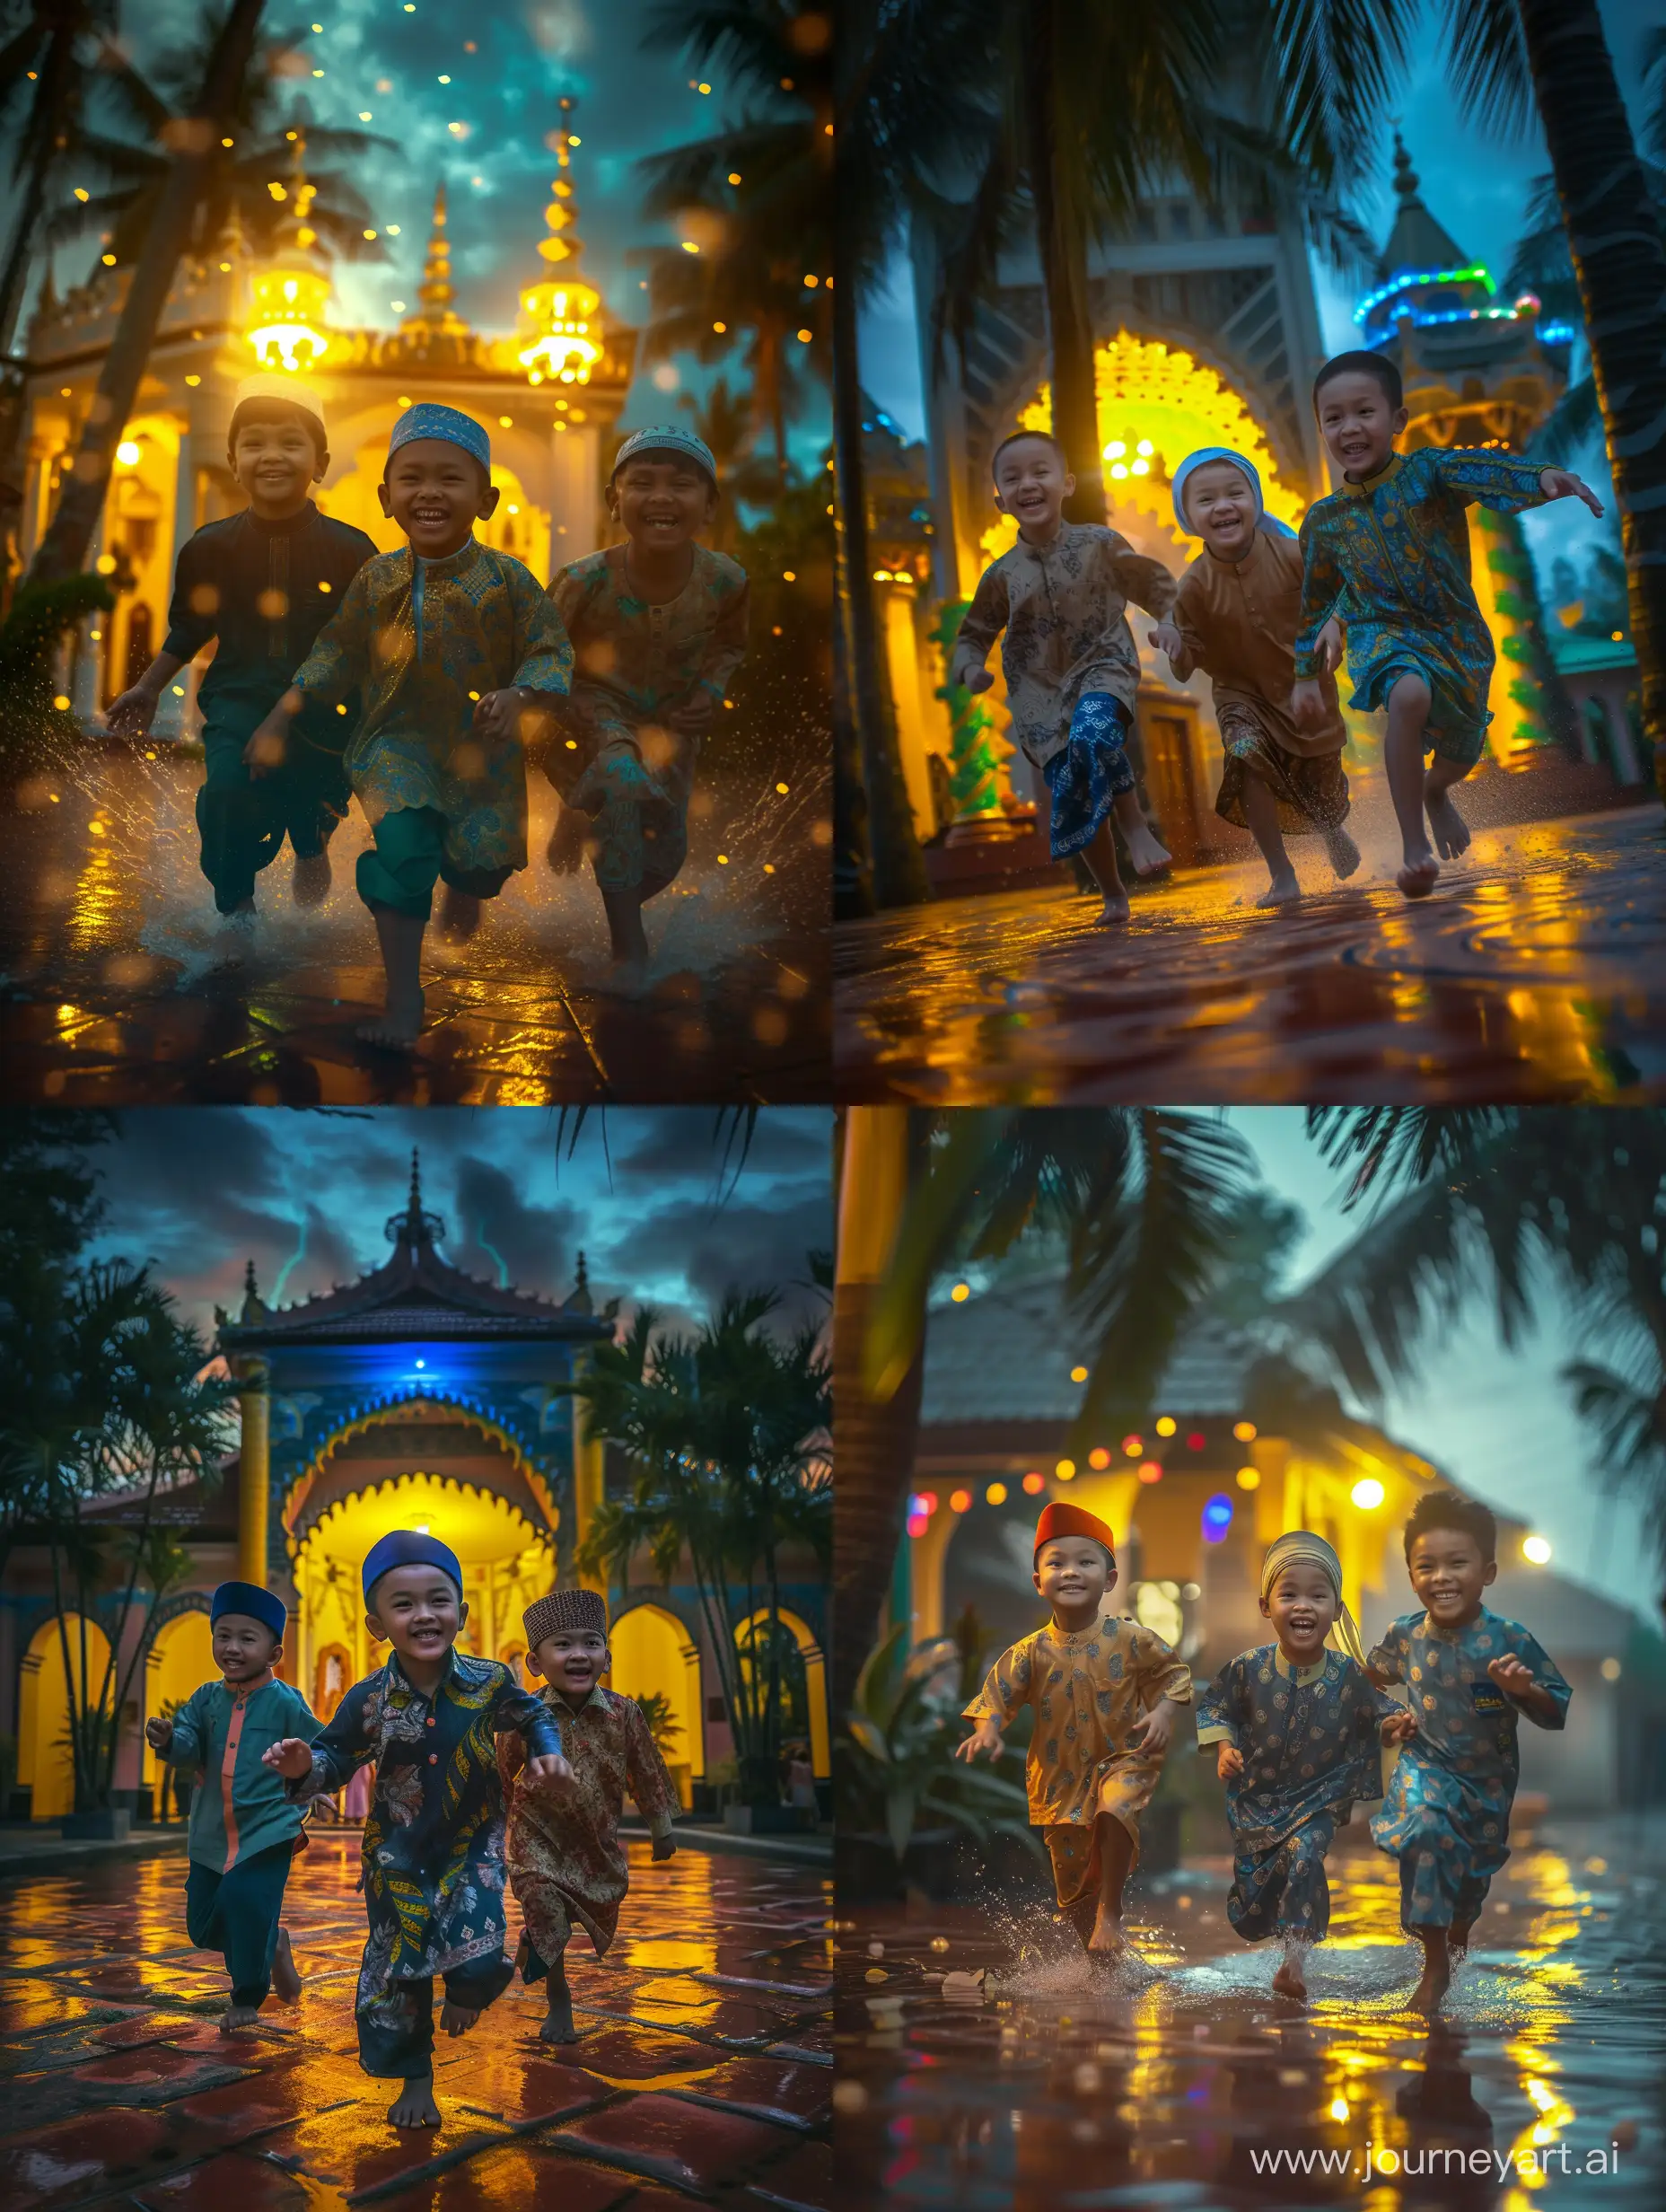 ultra realistic, close up three boys wearing malay clothes and wearing songkok ran into the mosque. cheerful smiling face. Morning atmosphere in the mosque compound. there are coconut trees. yellow and blue lights. a dark morning sky with a few rays of sunrise. canon eos-id x mark iii dslr --v 6.0